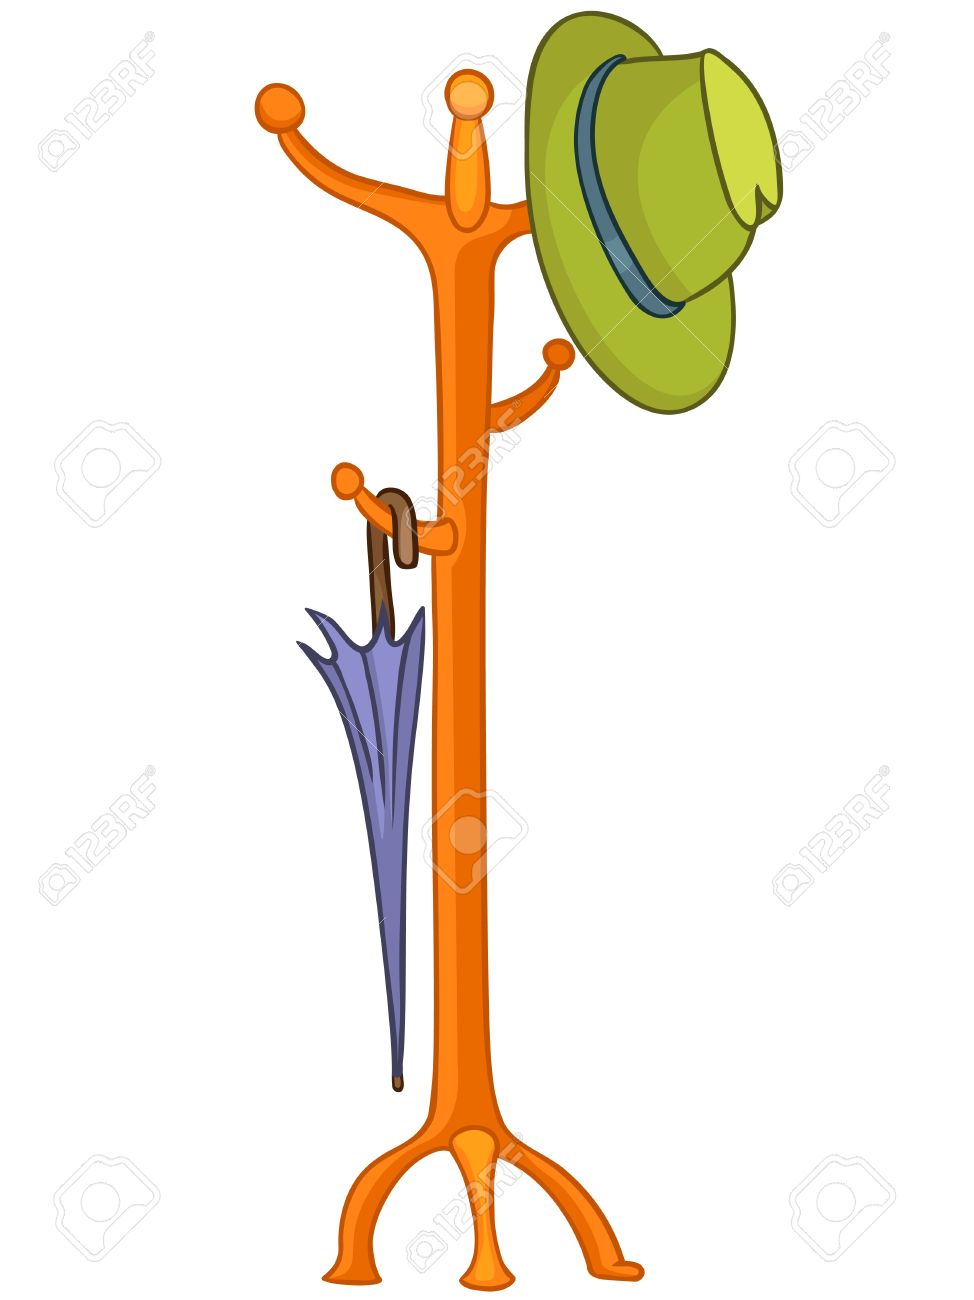 Cartoon Home Hanger Royalty Free Cliparts, Vectors, And Stock.